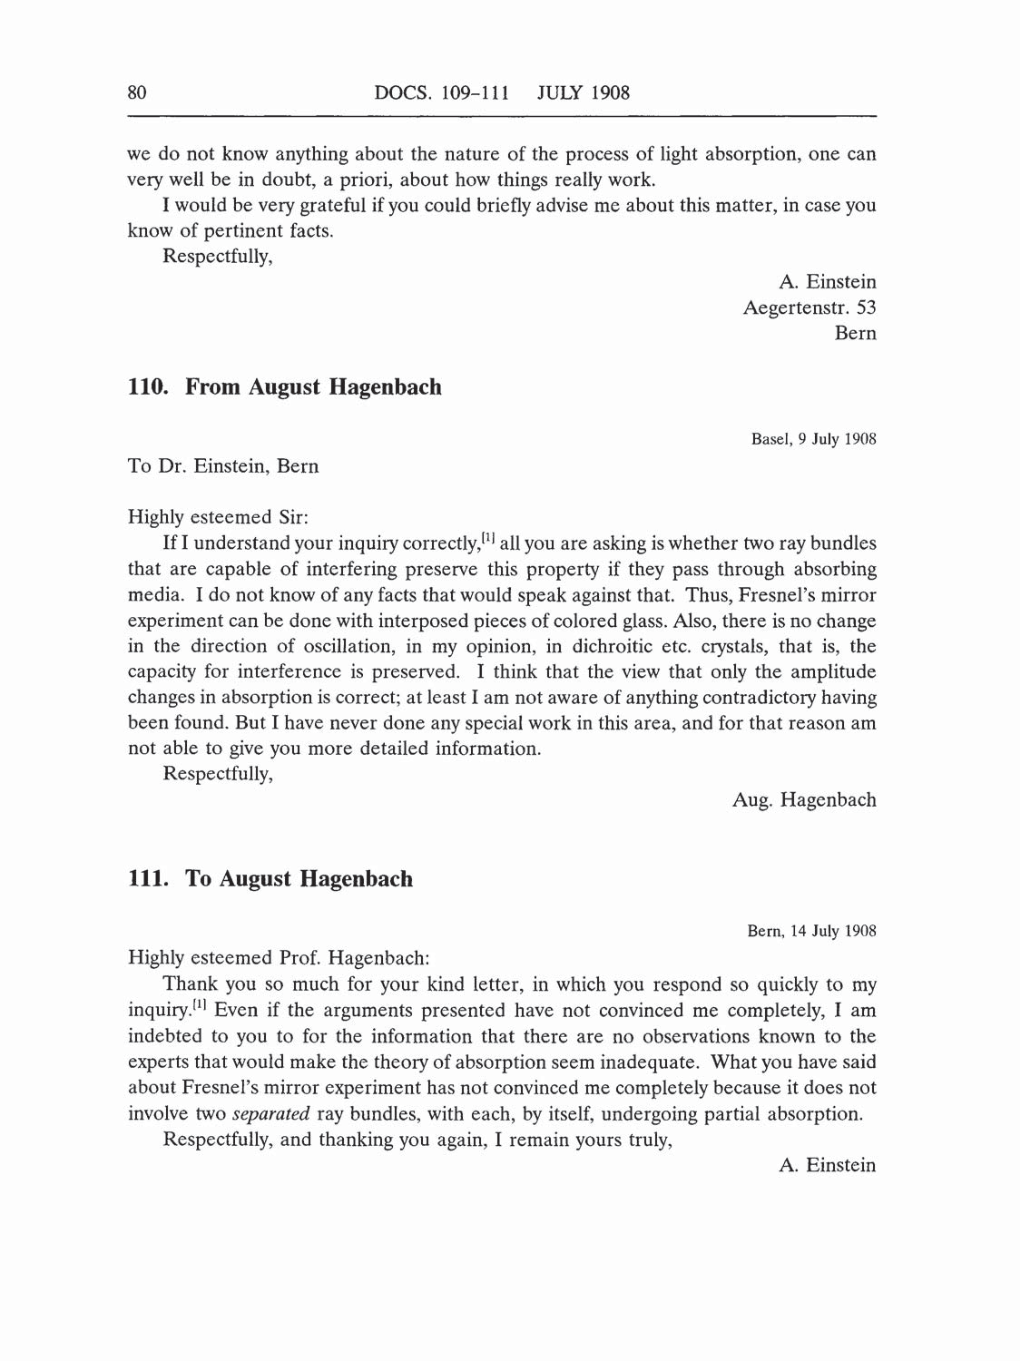 Volume 5: The Swiss Years: Correspondence, 1902-1914 (English translation supplement) page 80